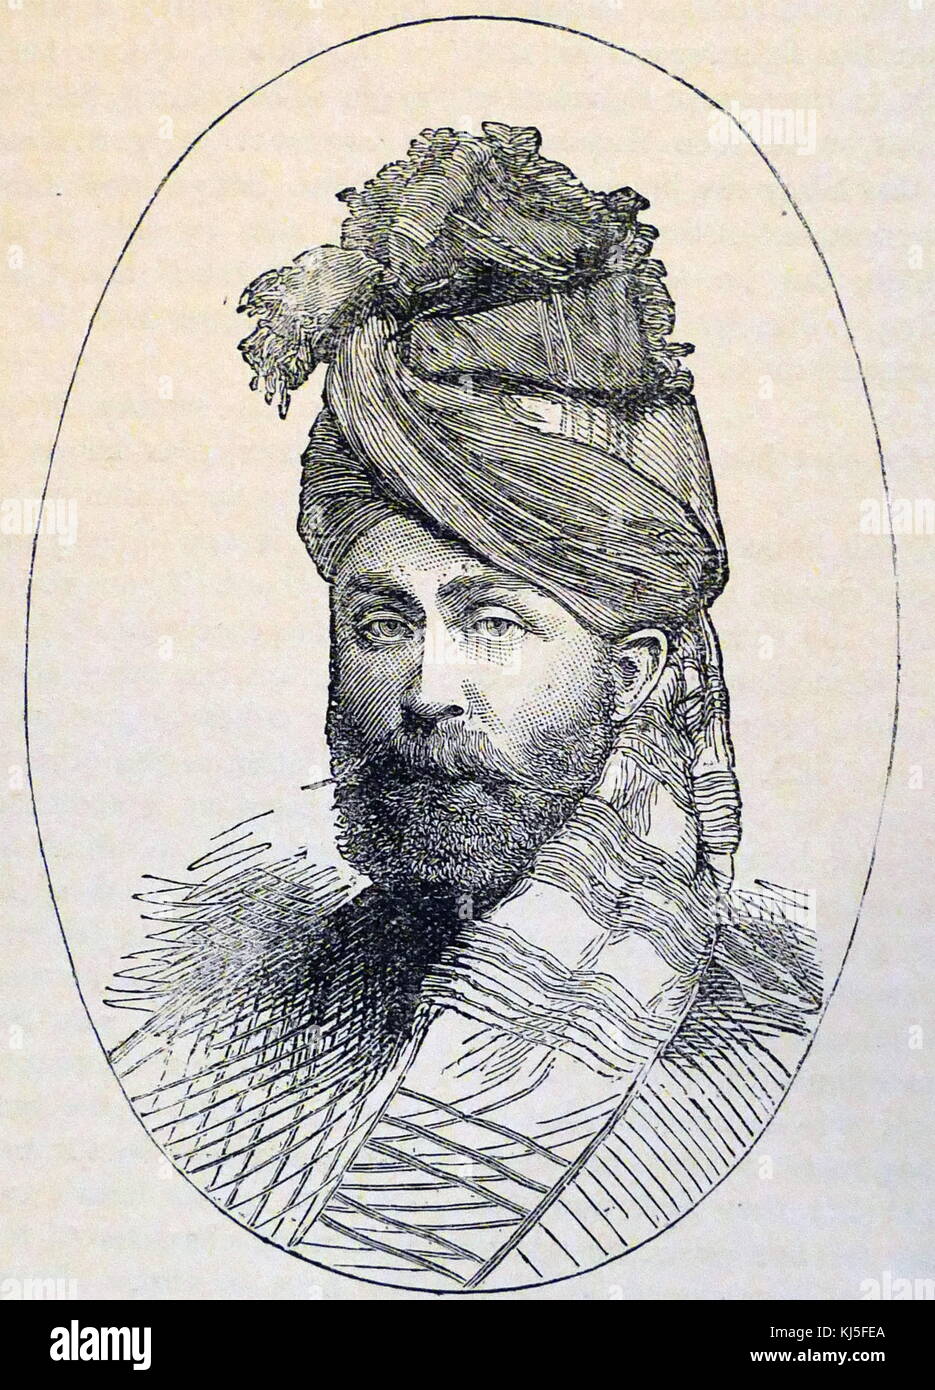 Portrait of Major Wigram Battye (1842-1879) a British soldier who served in the Corps of Guides in the 2nd China War, the Ambela Campaign and the Jowaki Expedition. In the 2nd Afghan War at the Battle of Futtehabad he was killed leading the Guides in a cavalry charge. There is a memorial tablet in St Pauls Cathedral crypt. Dated 19th Century Stock Photo